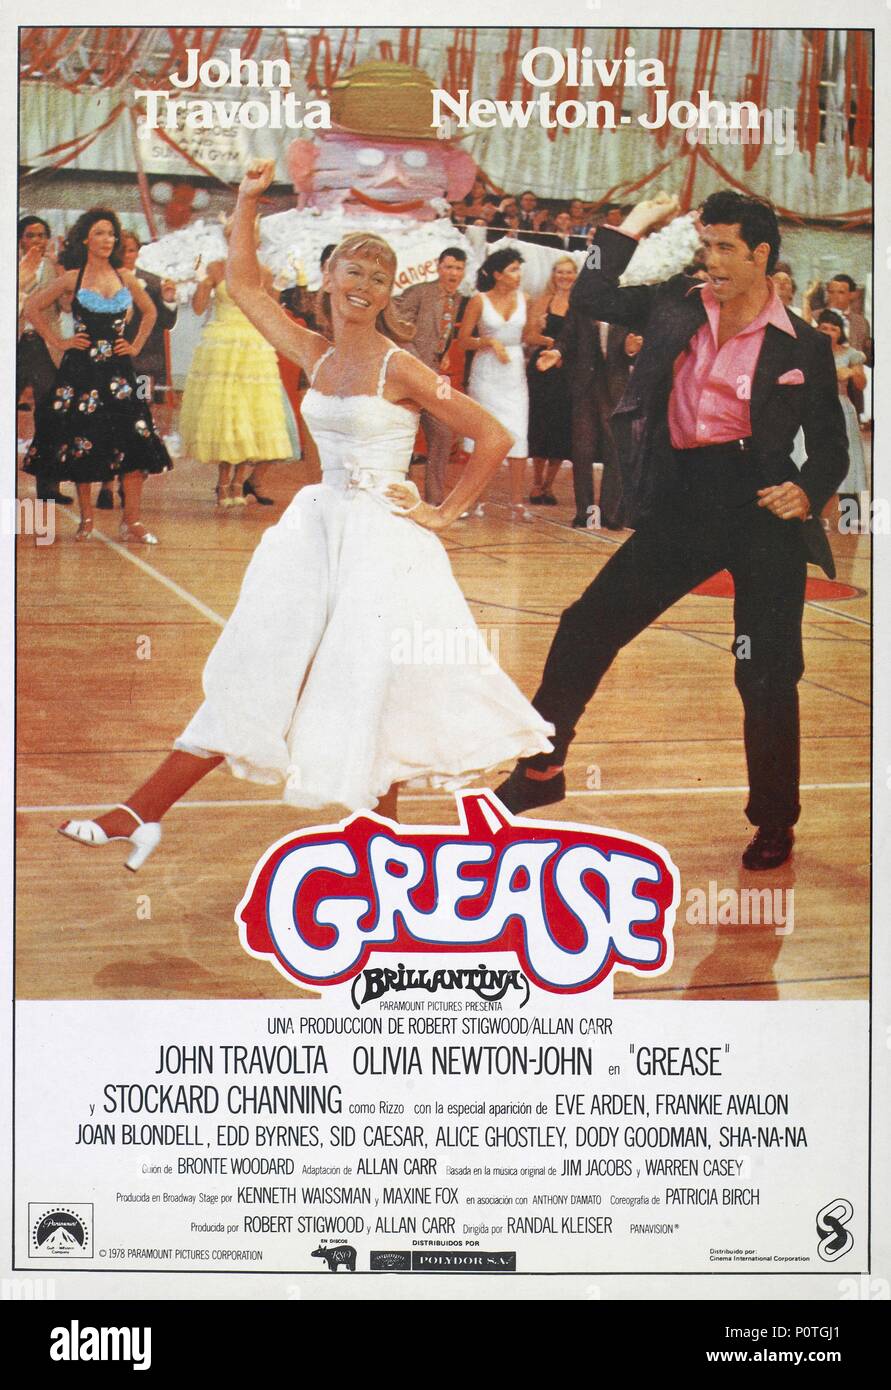 Original Film Title: GREASE.  English Title: GREASE.  Film Director: RANDAL KLEISER.  Year: 1978. Credit: PARAMOUNT PICTURES / Album Stock Photo